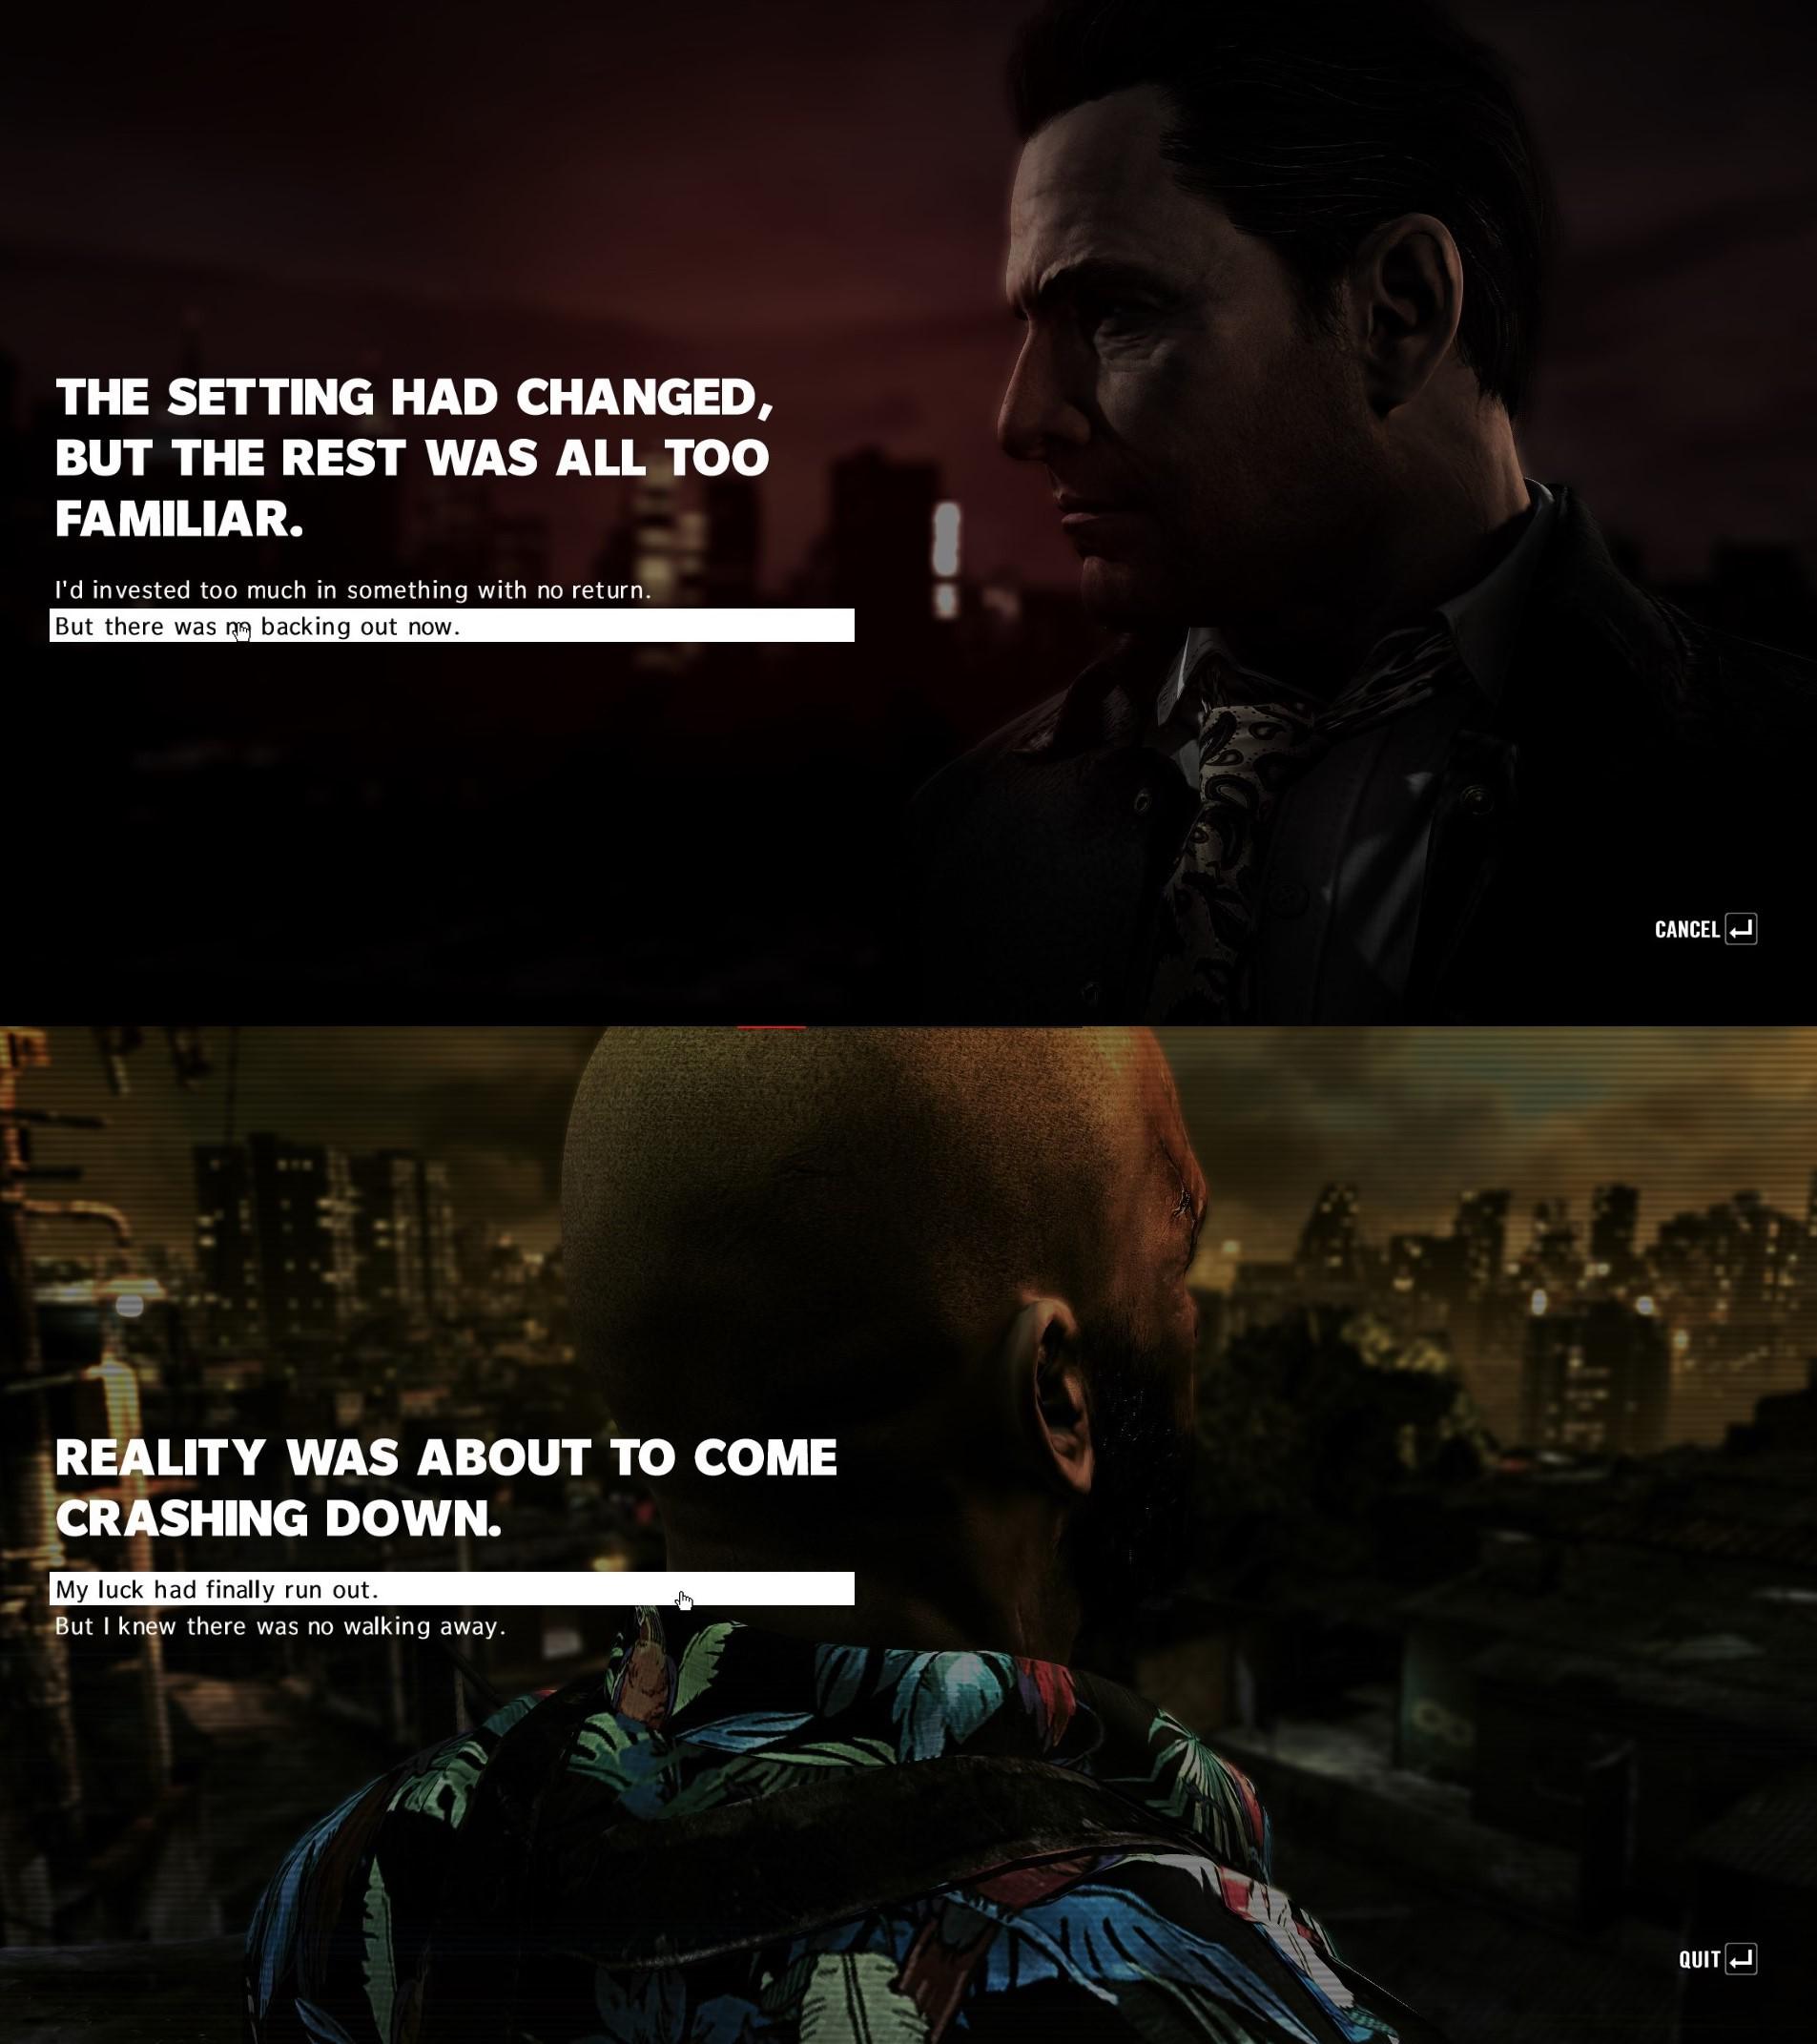 Max Payne Quotes